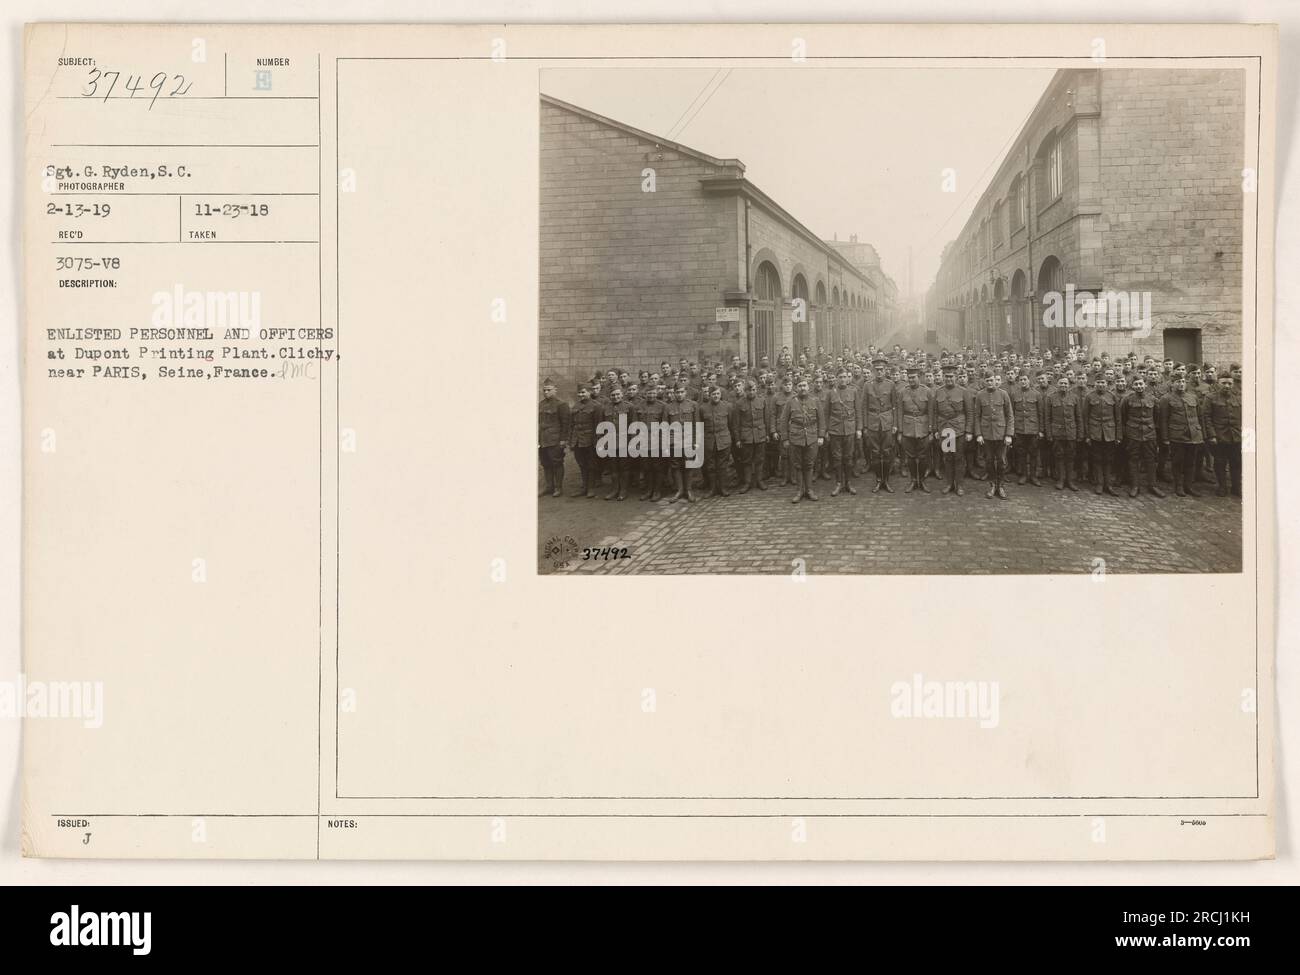 Enlisted personnel and officers of the American military at Dupont Printing Plant in Clichy, near Paris, France during World War One. The photo was taken on November 23, 1918, by Sgt. G. Ryden from the Signal Corps. Stock Photo